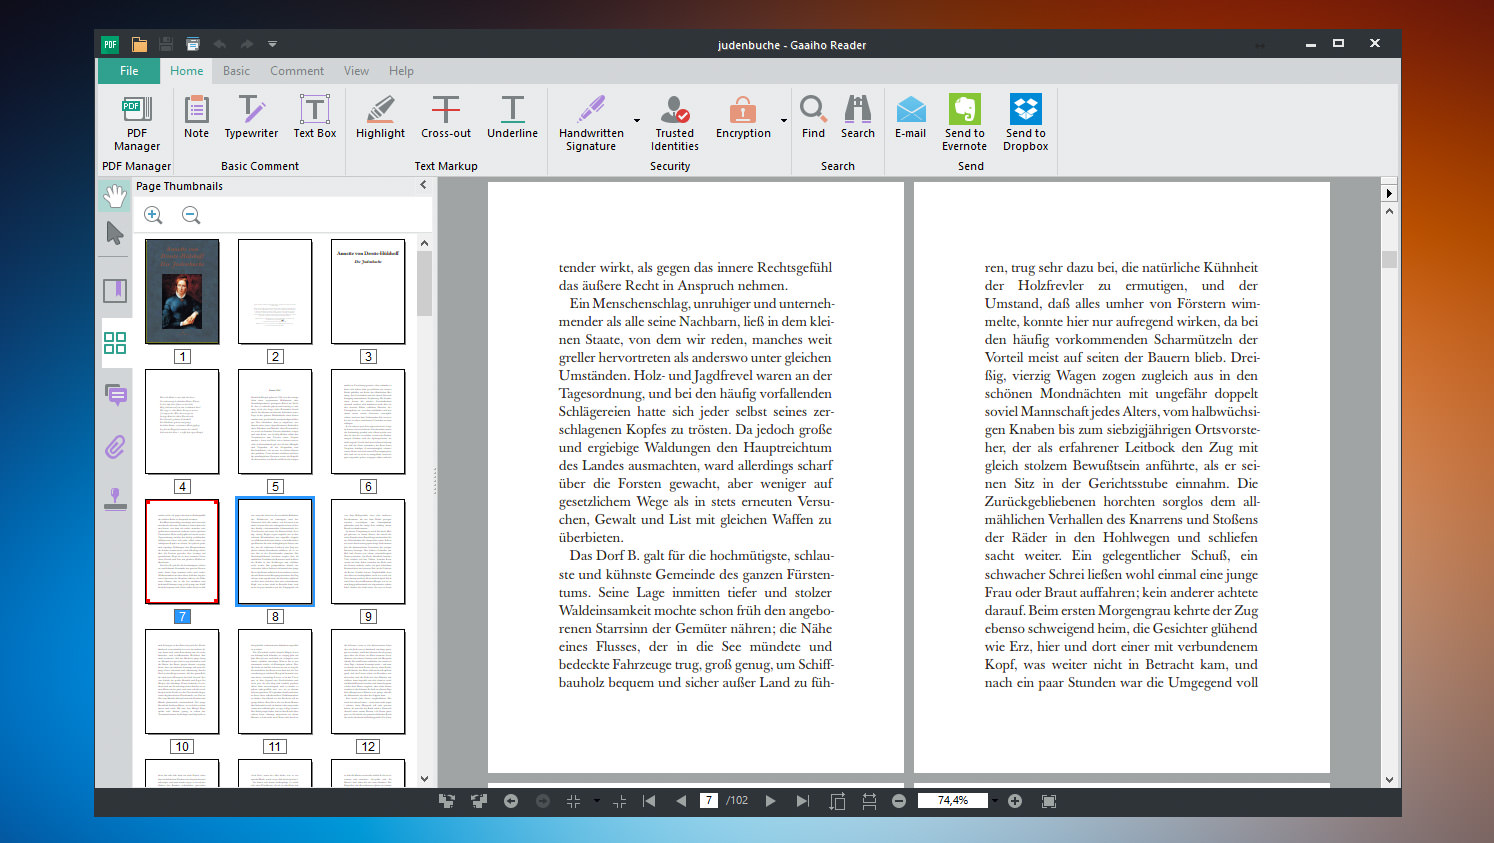 foxit pdf reader free download full version for windows 7